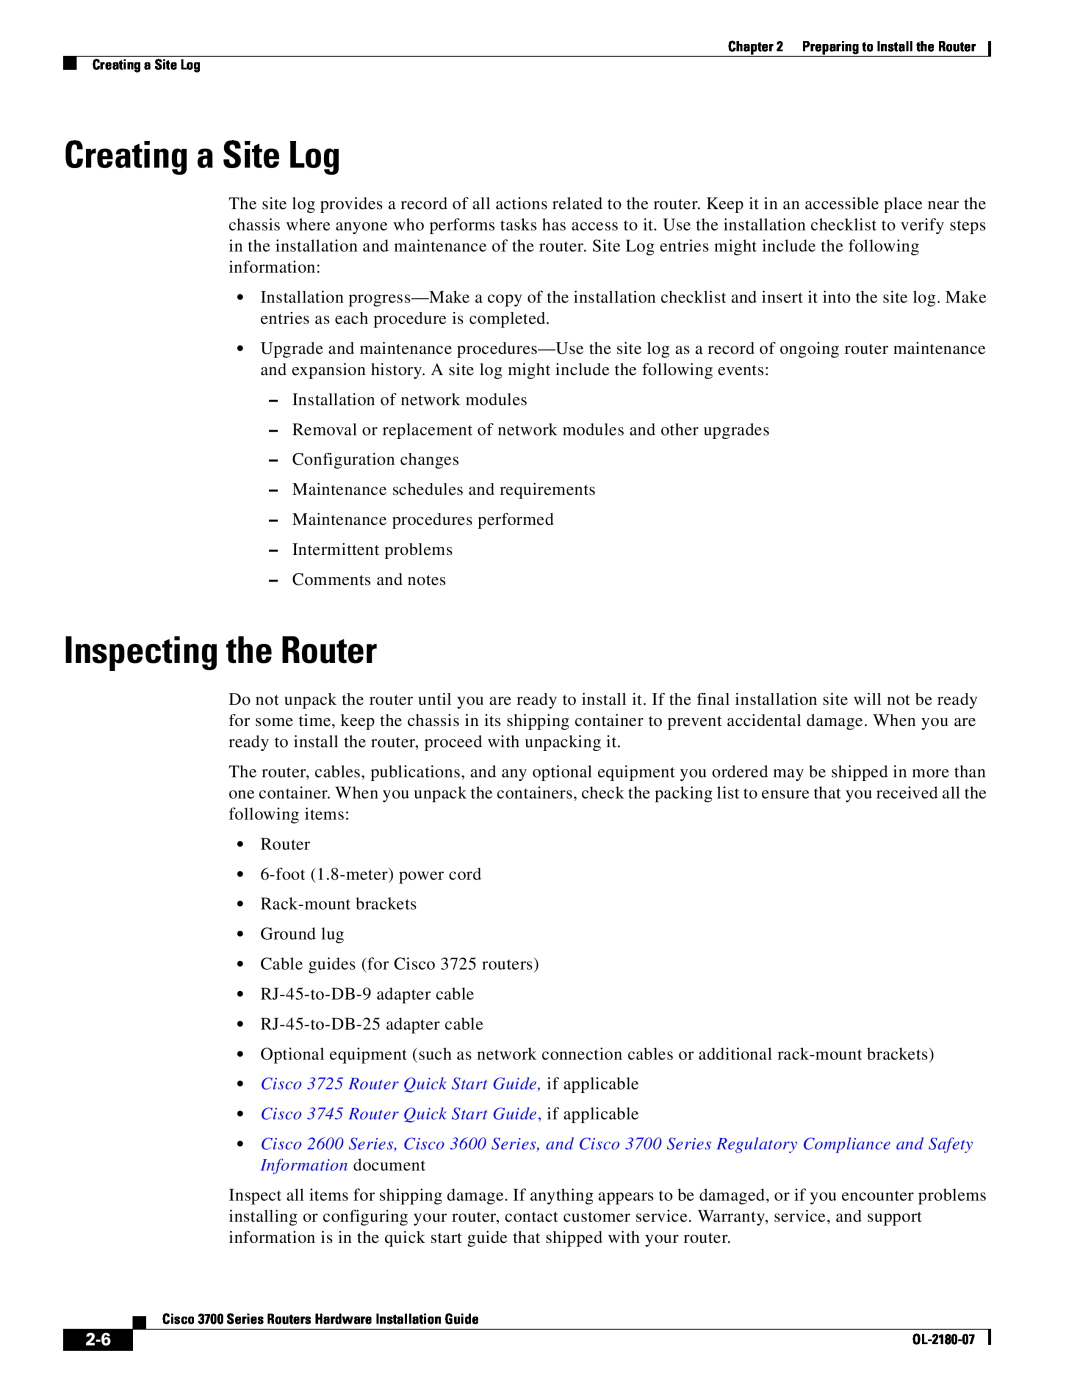 Cisco Systems 3700 Series manual Creating a Site Log, Inspecting the Router 